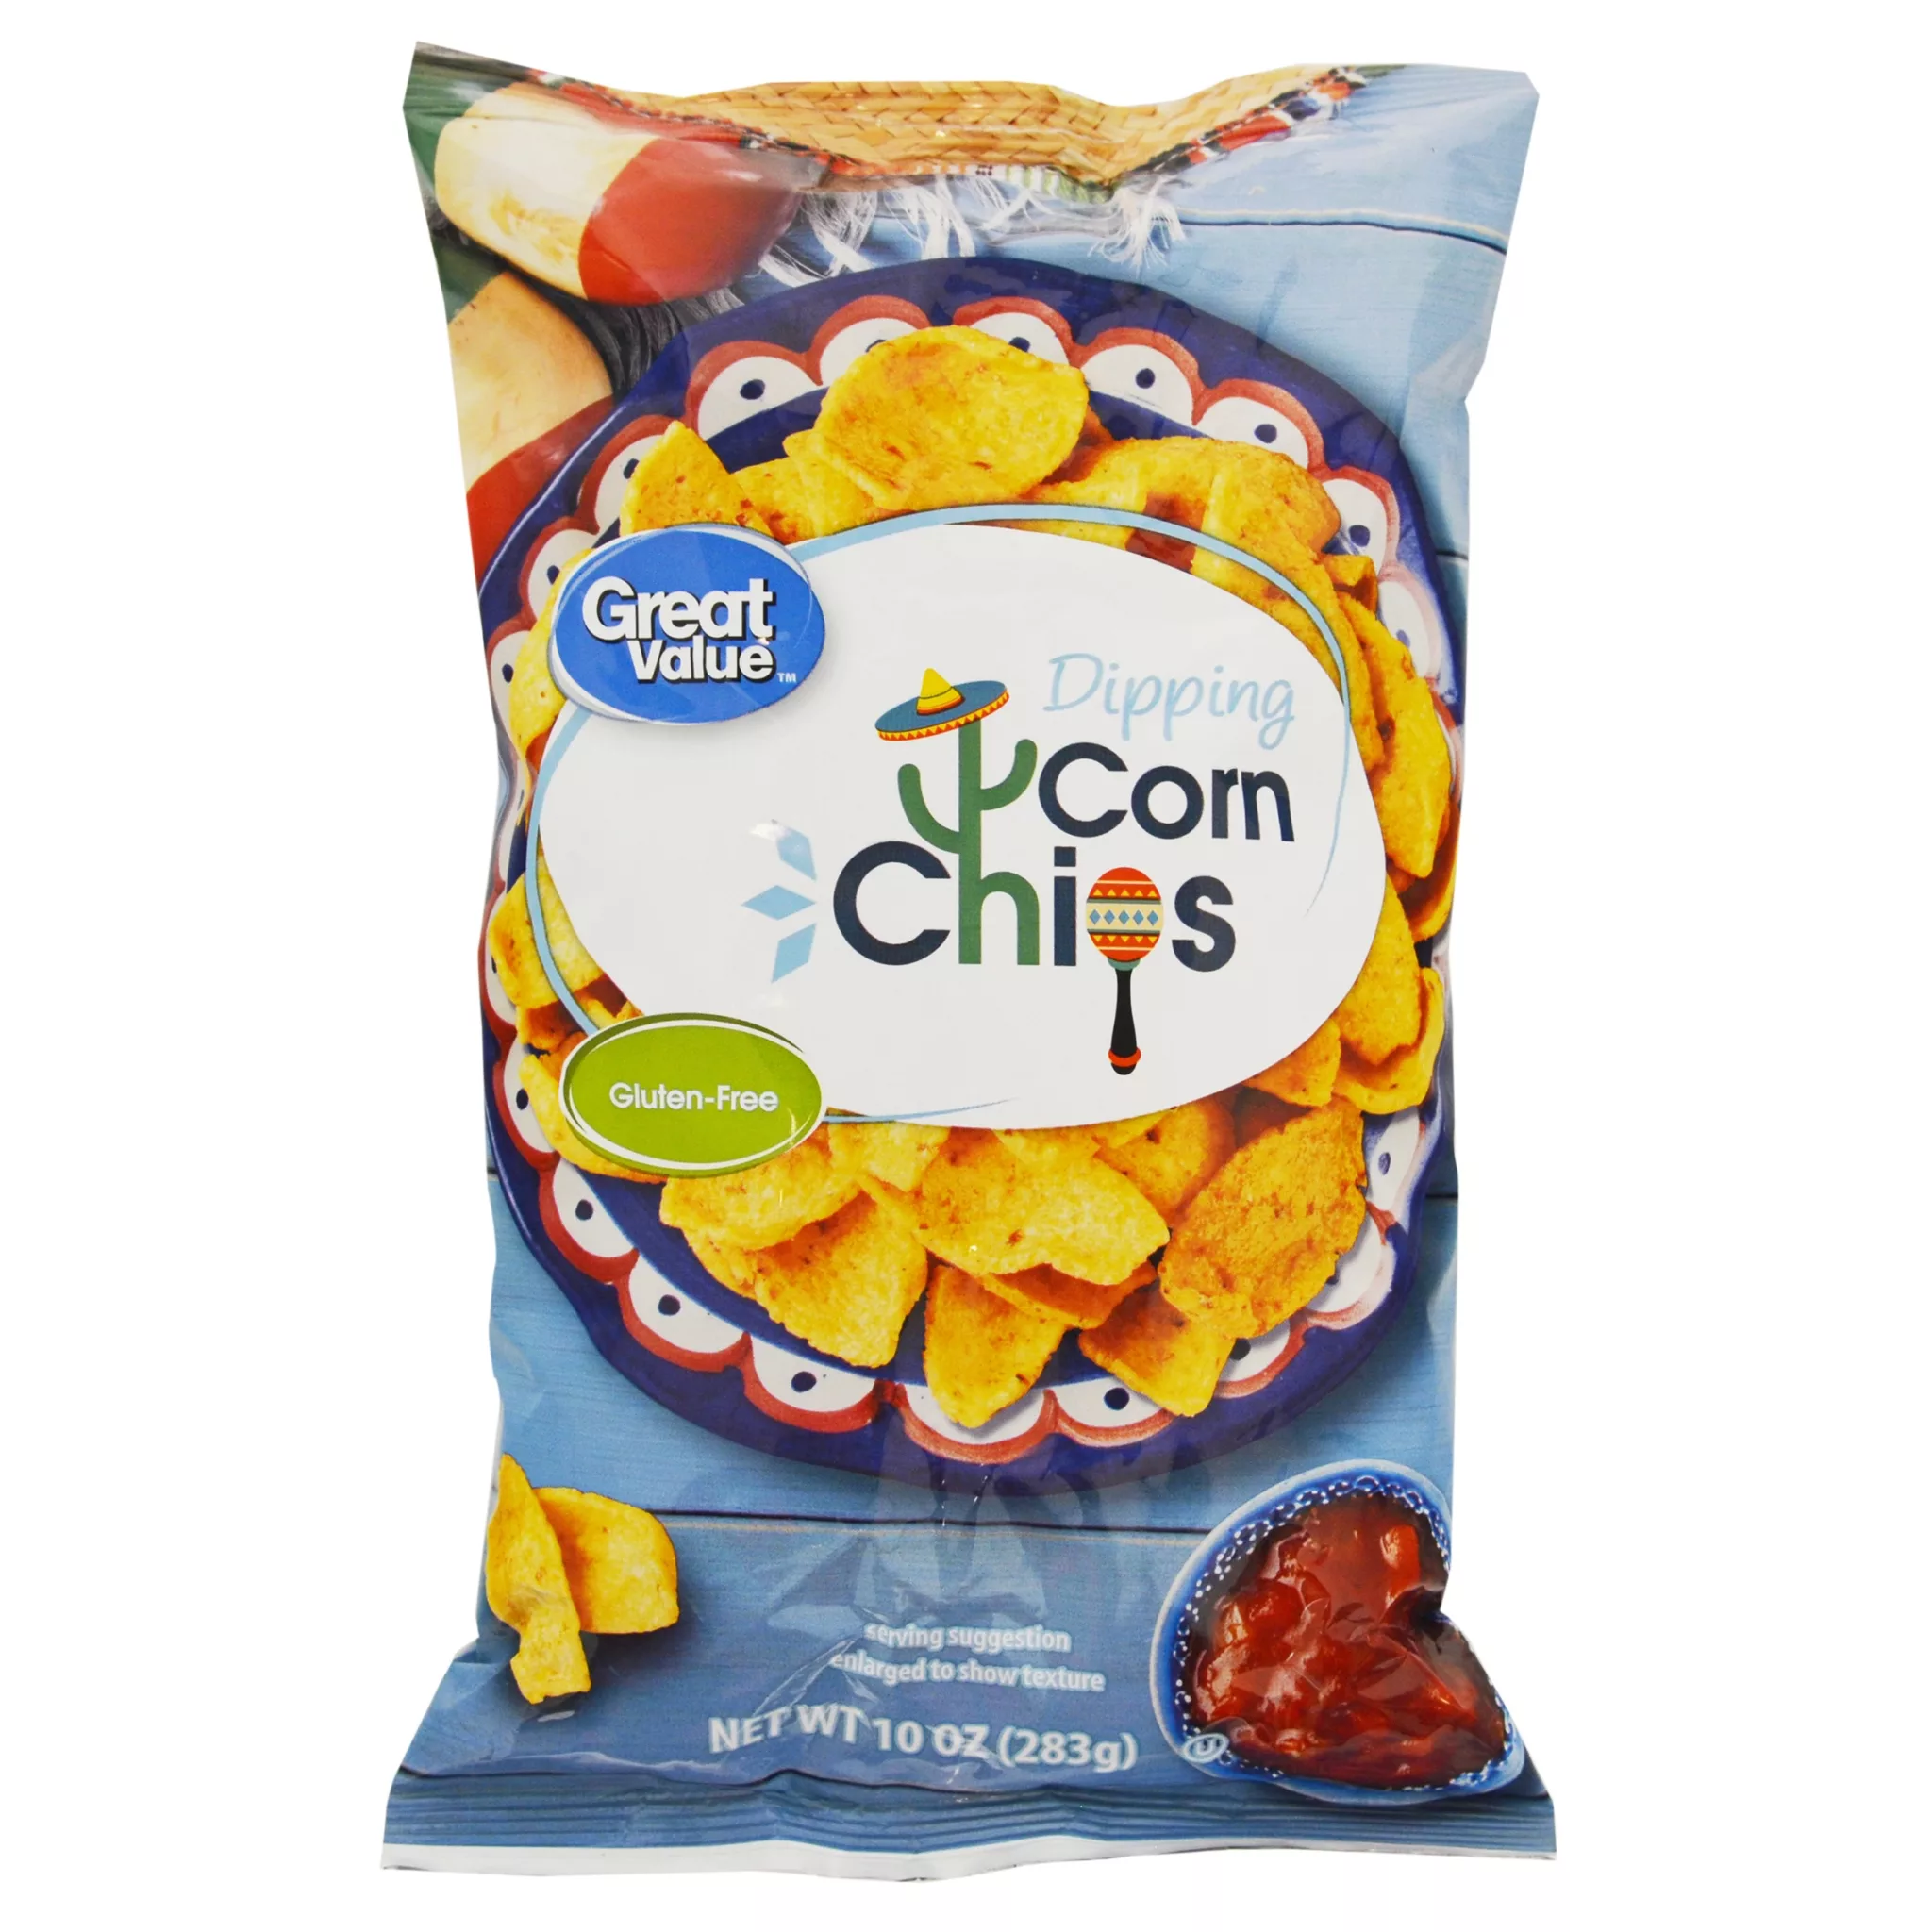 Great Value Gluten-Free Value Dipping Corn Chips, 10 Oz.